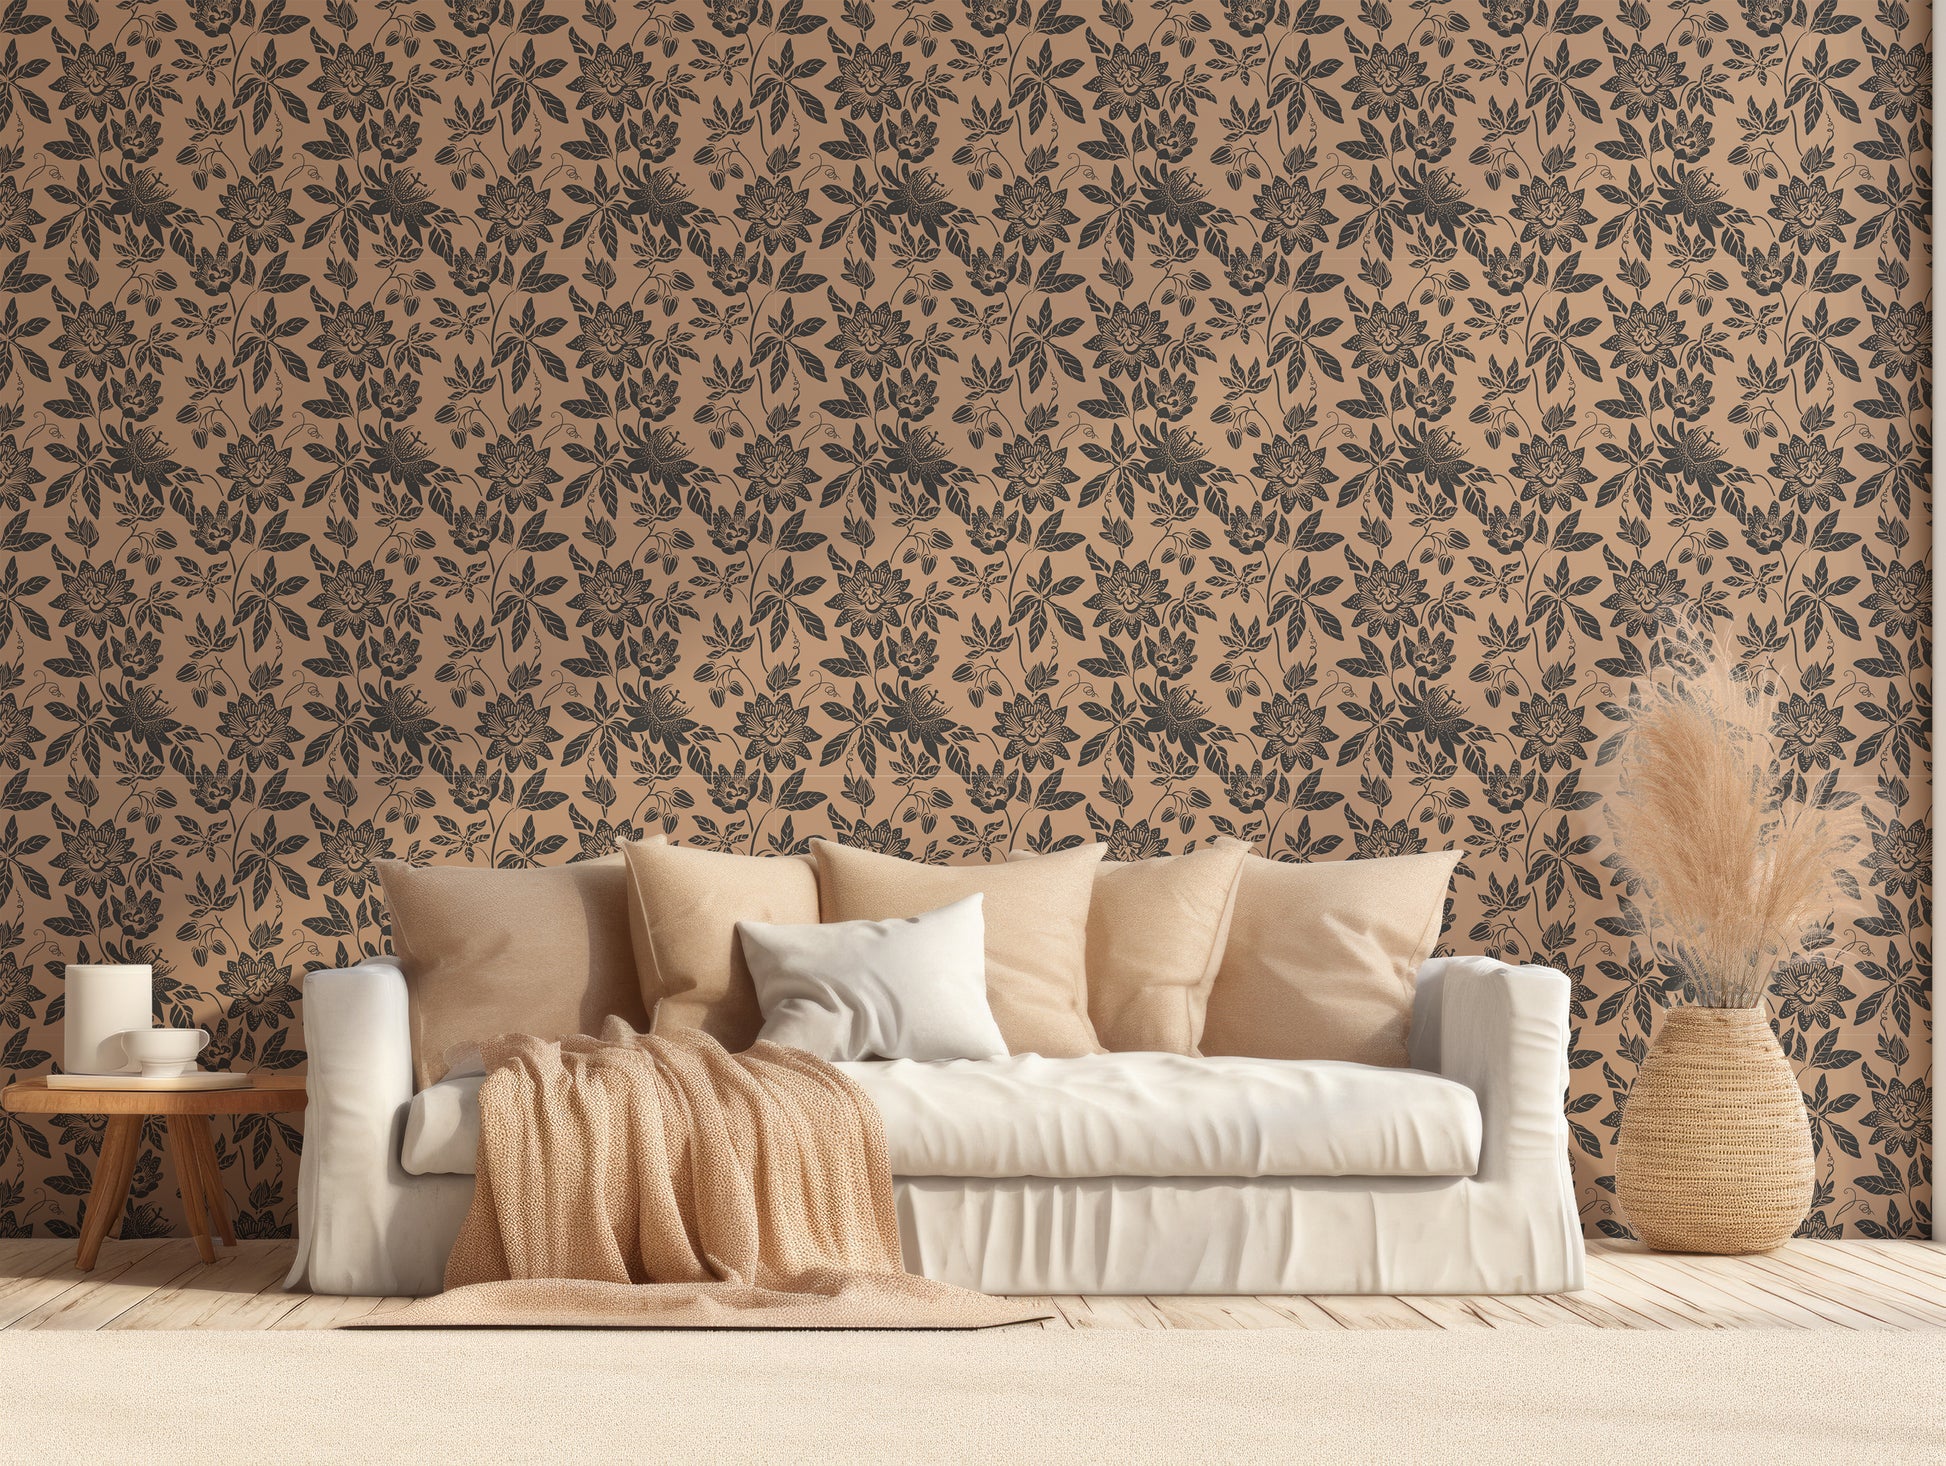 Cecilia Wallpaper In Living Room With Neutral Cream And Beige Sofa With Feathers Next to Sofa